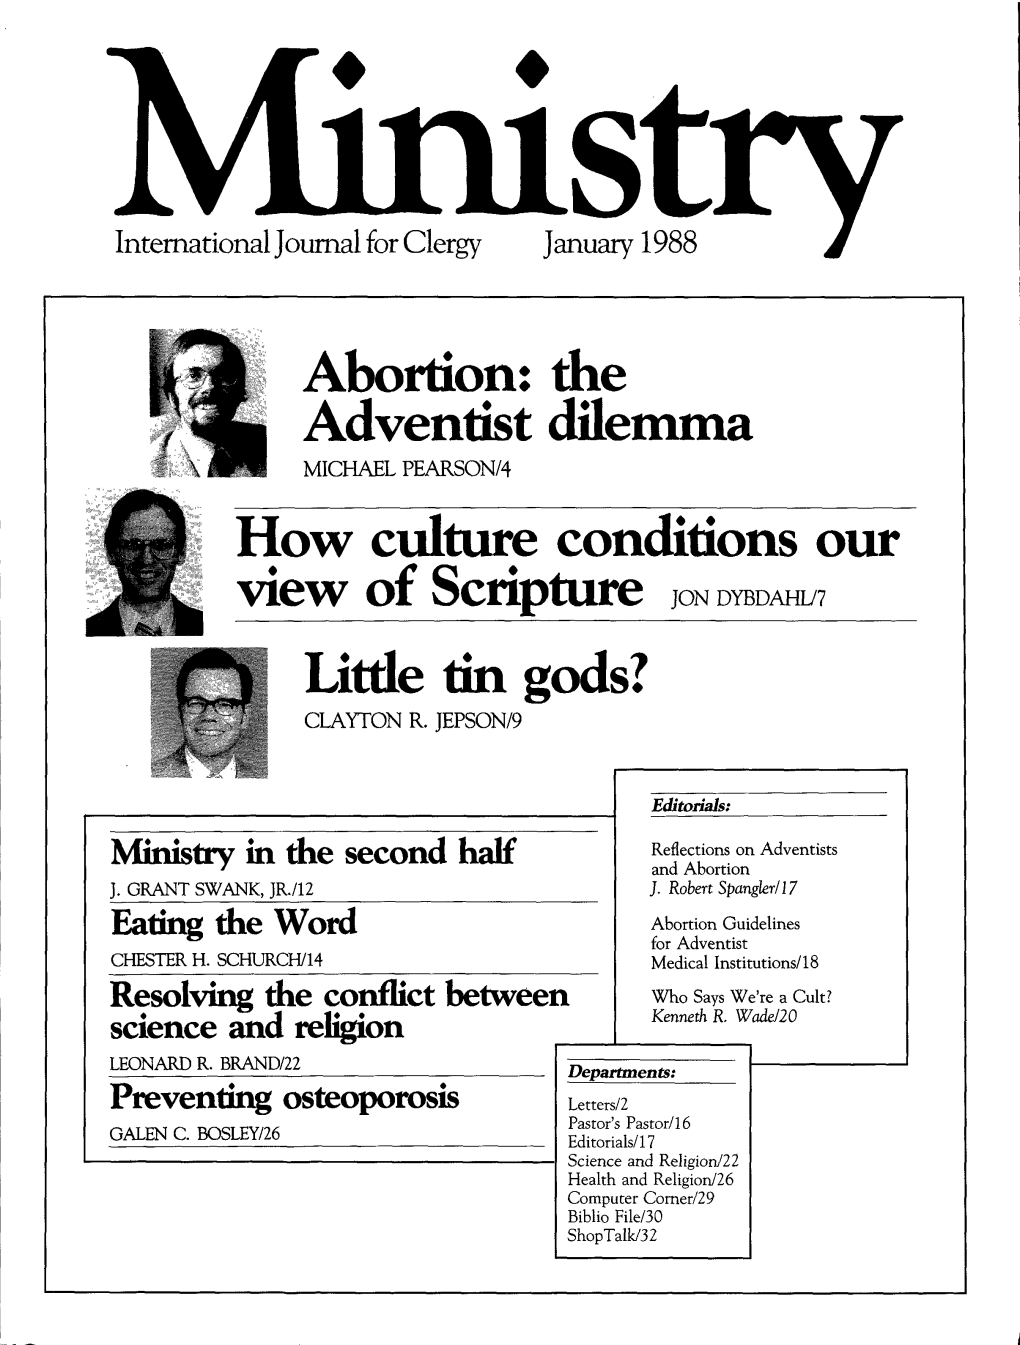 Abortion: the Adventist Dilemma MICHAEL PEARSON/4 How Culture Conditions Our View of Scripture JON DYBDAHL/7 Little Tin Gods? CLAYTON R